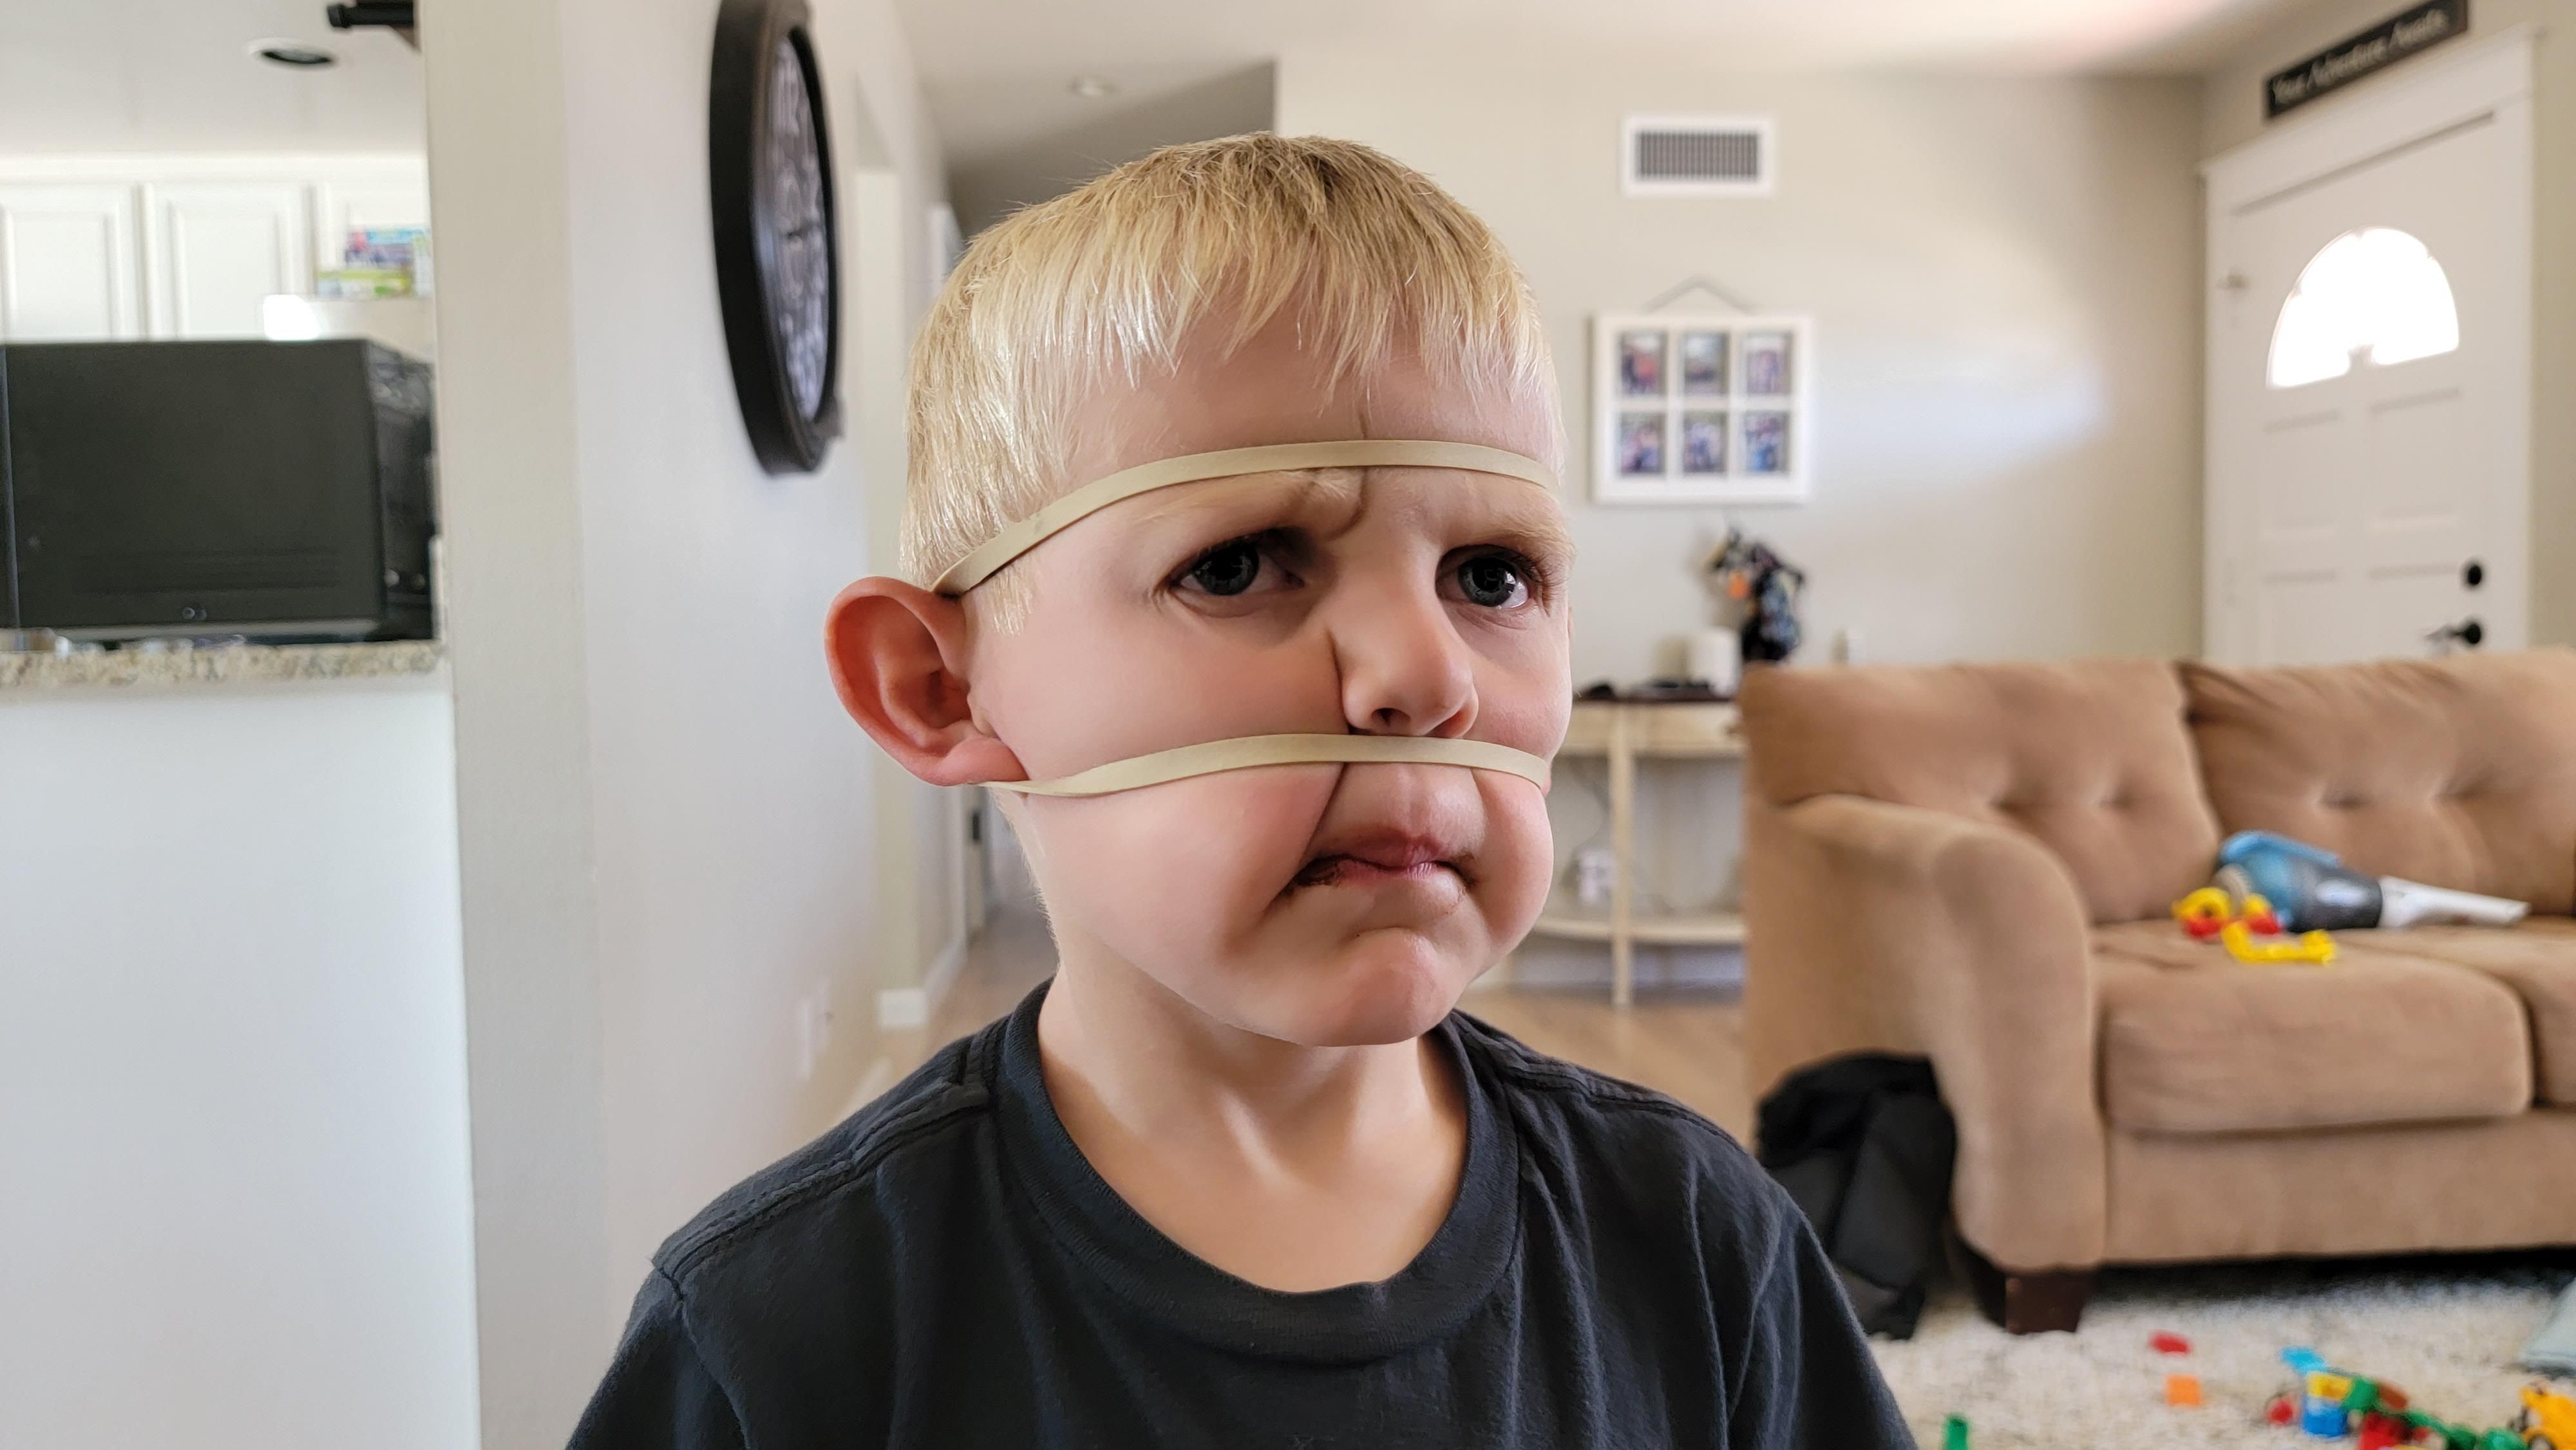 My 4 year old brought me a rubber band and asked me to do this to him.